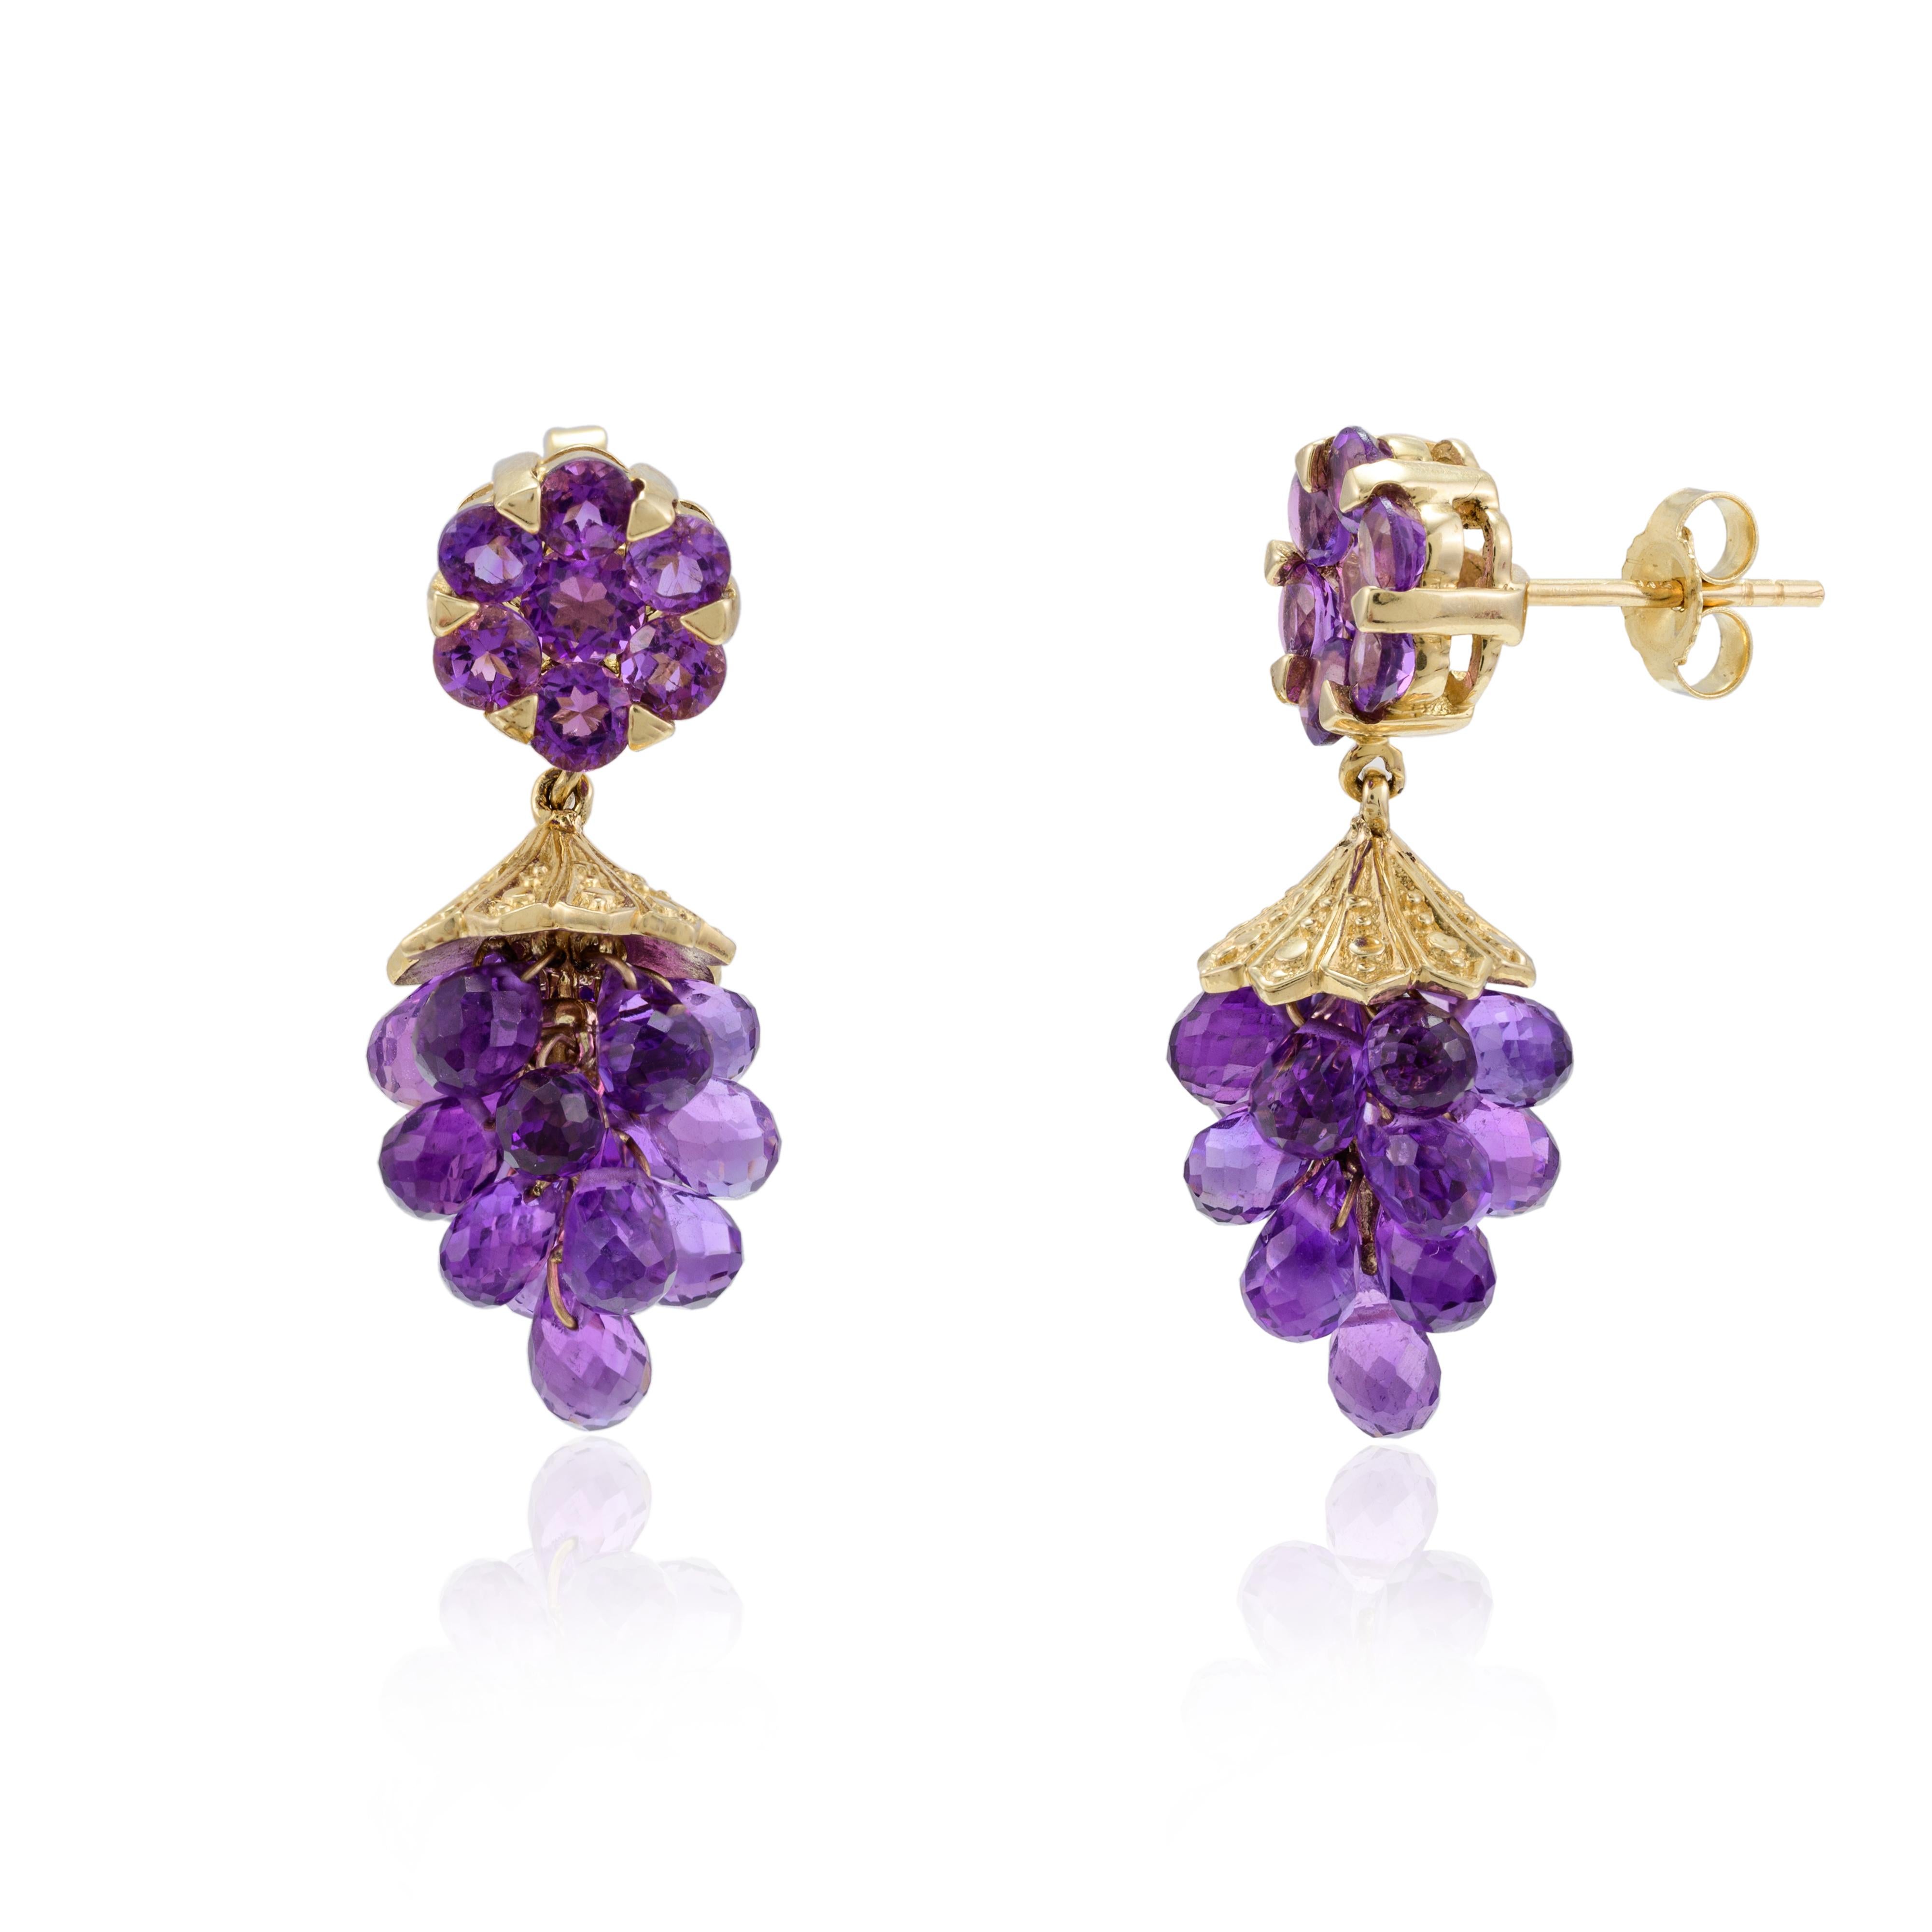 Amethyst Gemstone Grape Dangle Earrings in 14K Gold to make a statement with your look. You shall need stud earrings to make a statement with your look. These earrings create a sparkling, luxurious look featuring bead and round cut